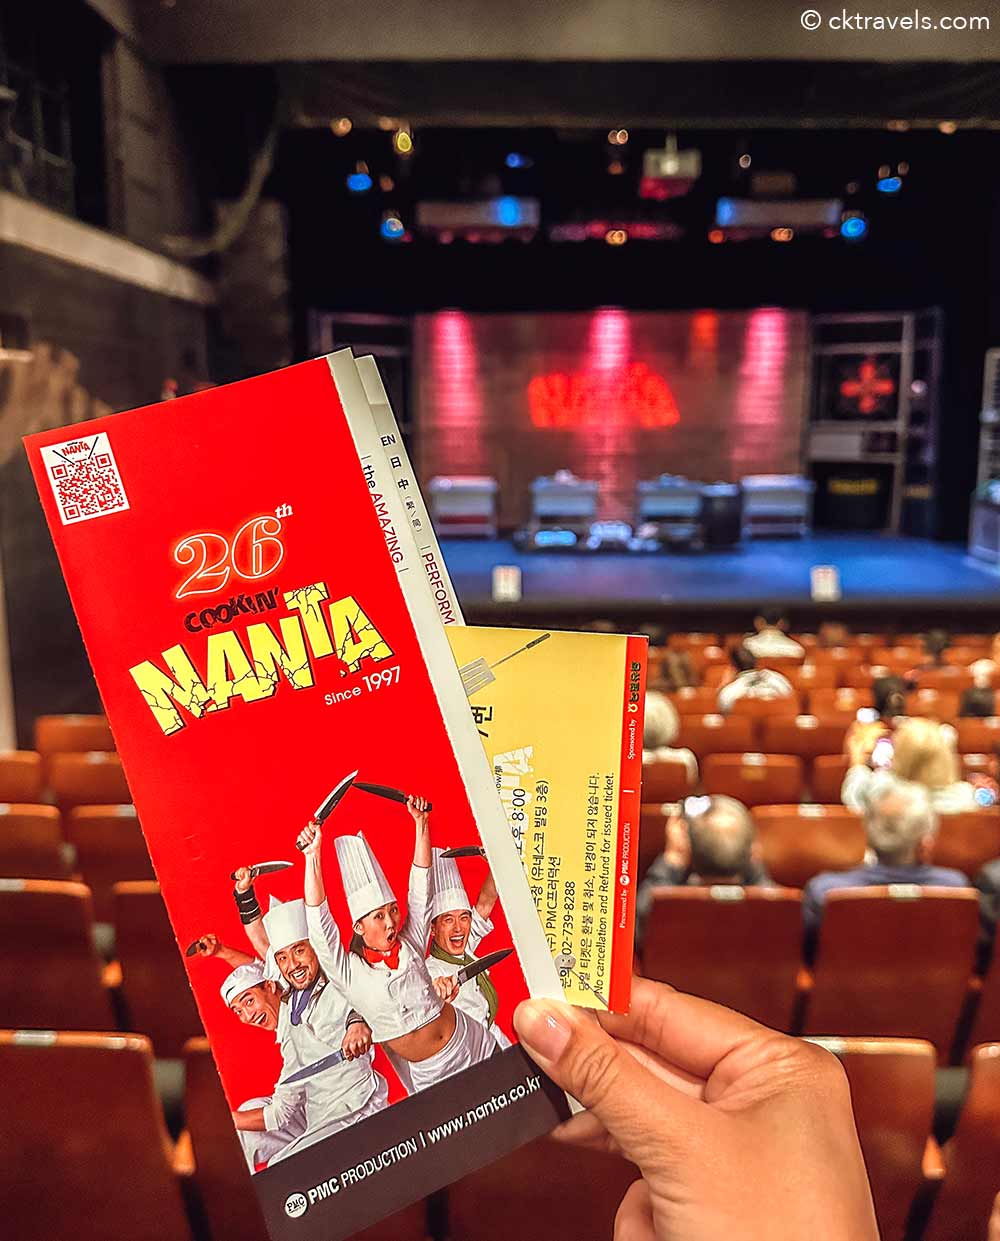 Seoul Theater Show at NANTA Theatre - things to do in Seoul